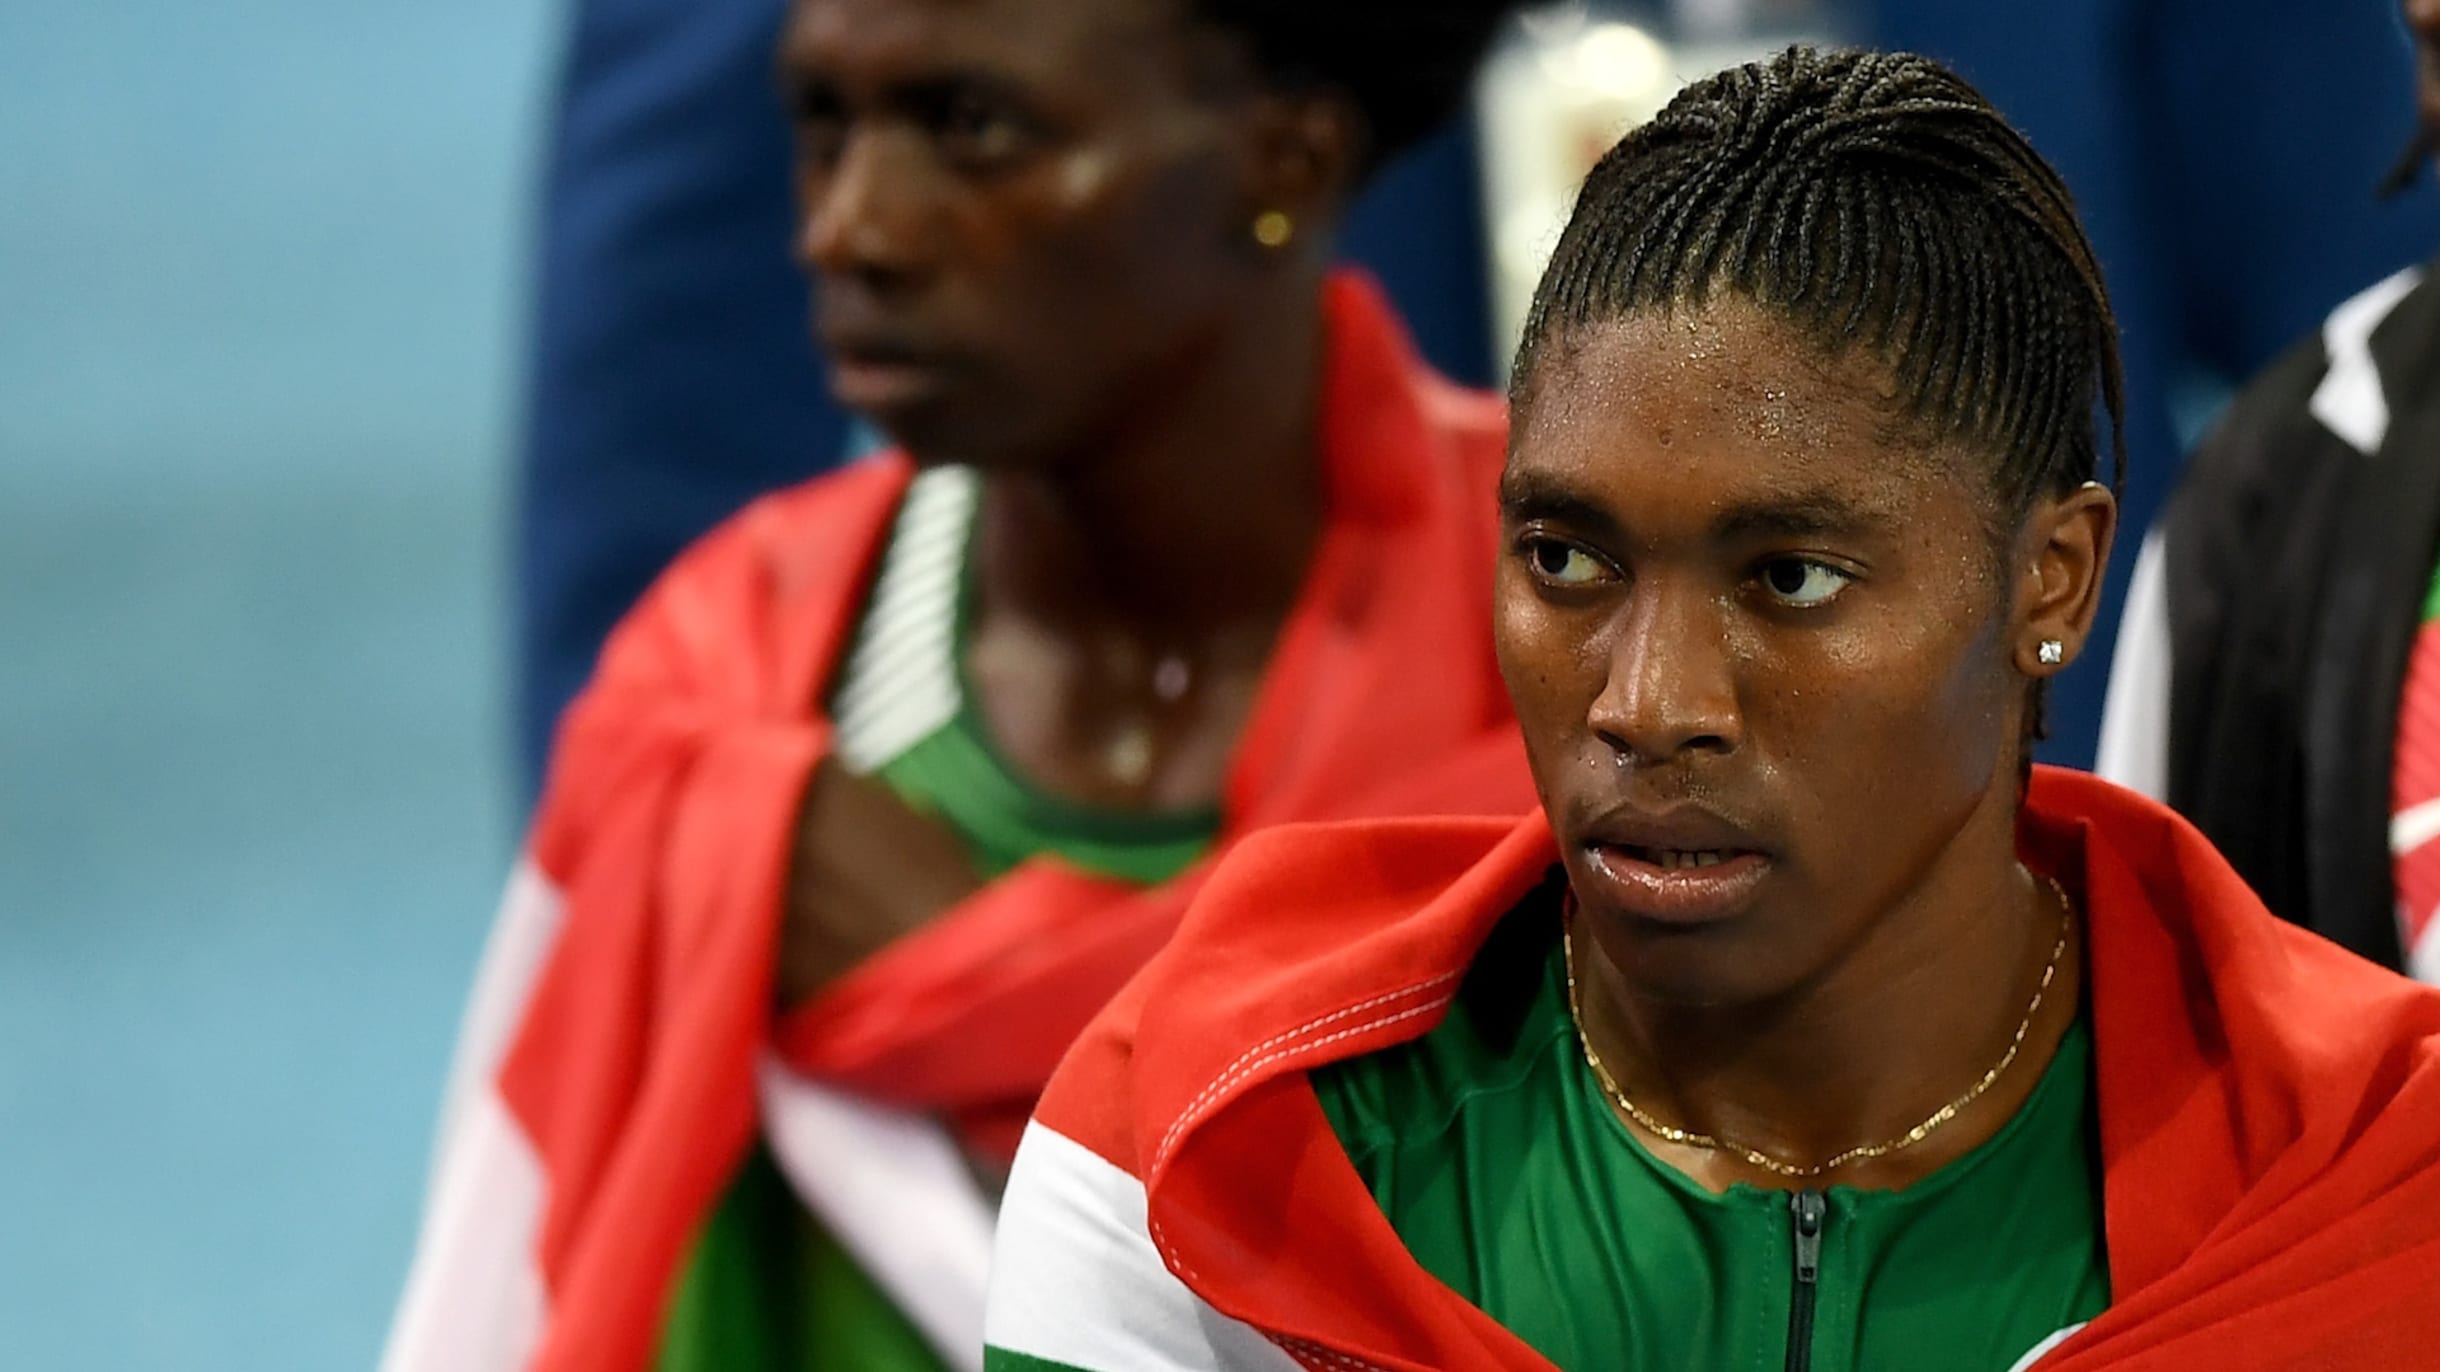 Caster Semenya is being forced to alter her body to make slower